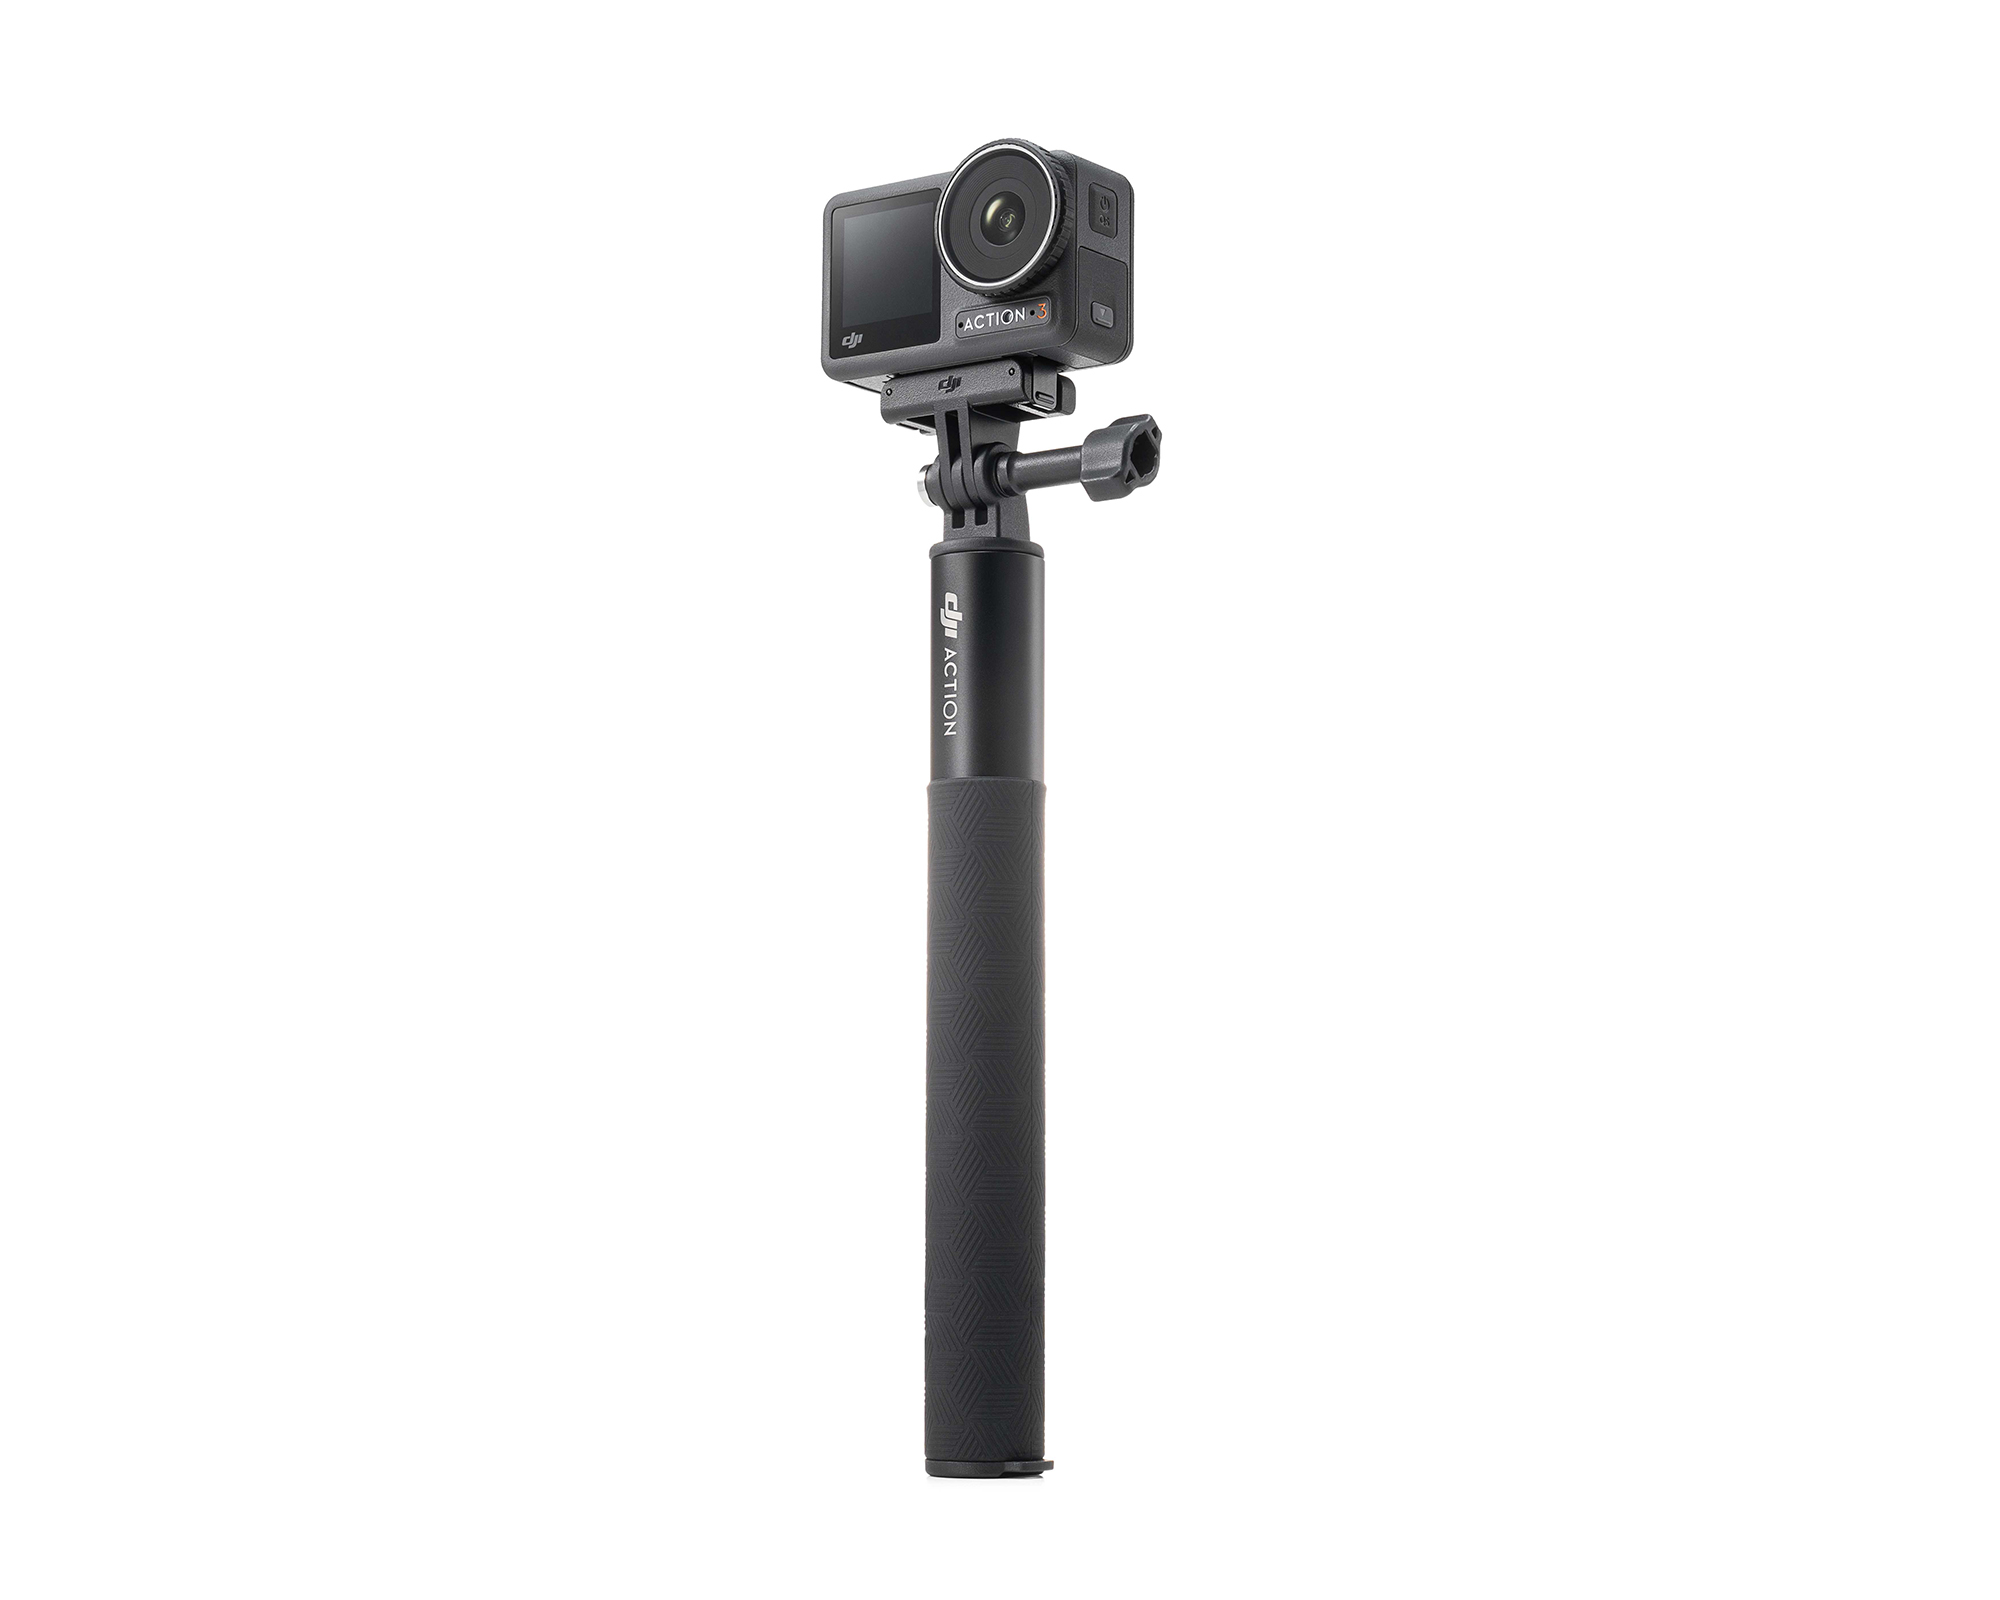 DJI announces Osmo Action 3, with 4K/120p recording, longer